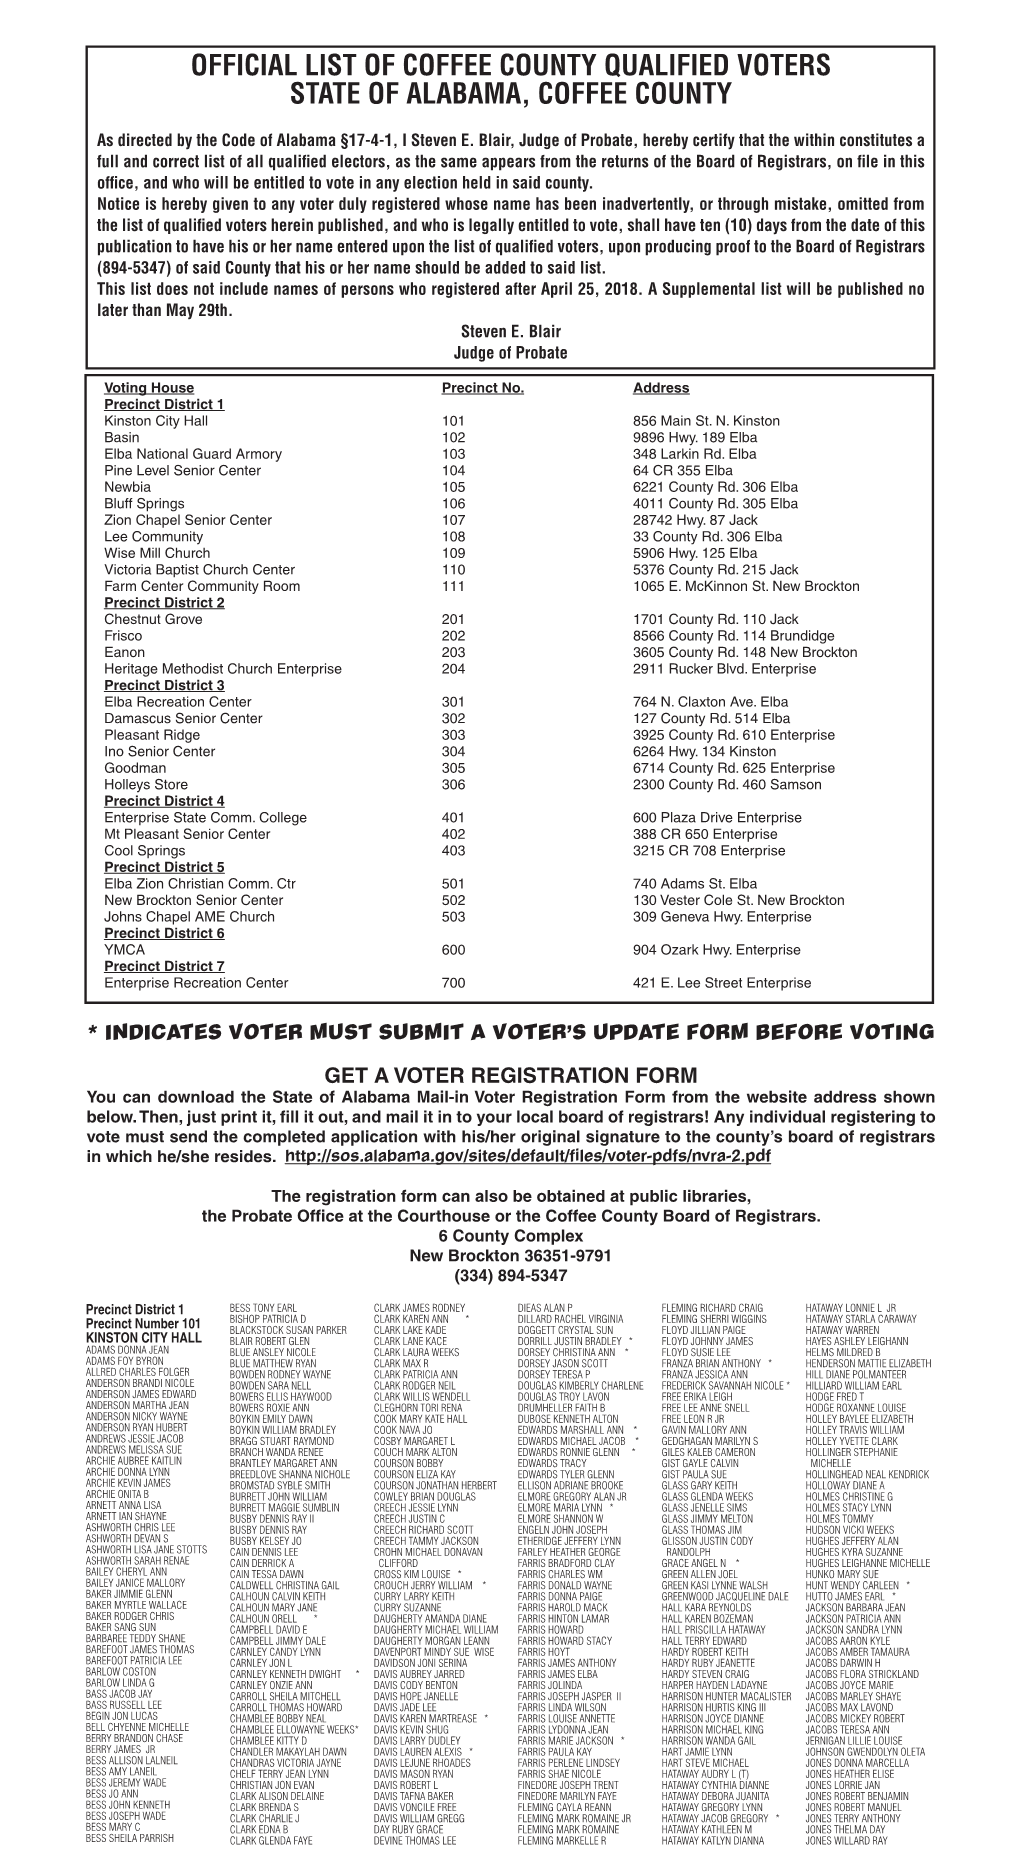 Official List of Coffee County Qualified Voters State of Alabama, Coffee County